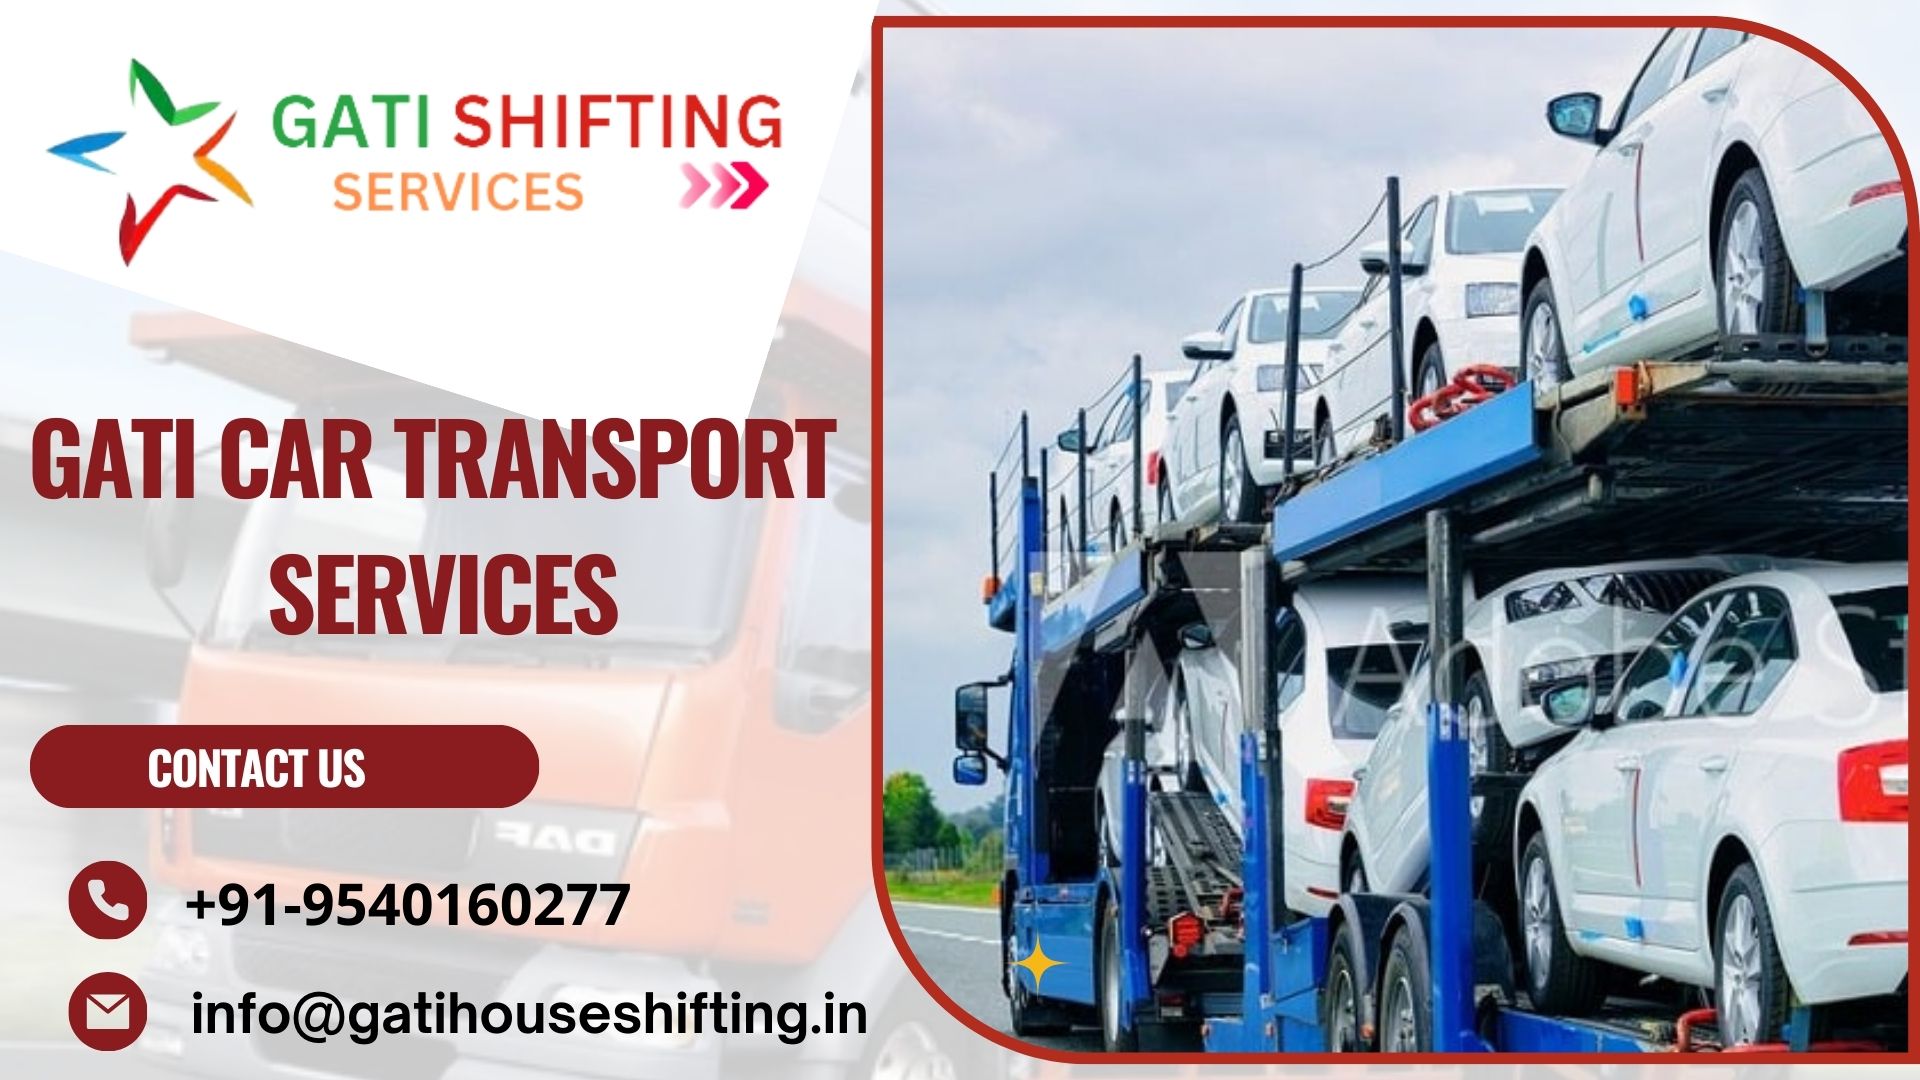 Car transport services in Noida